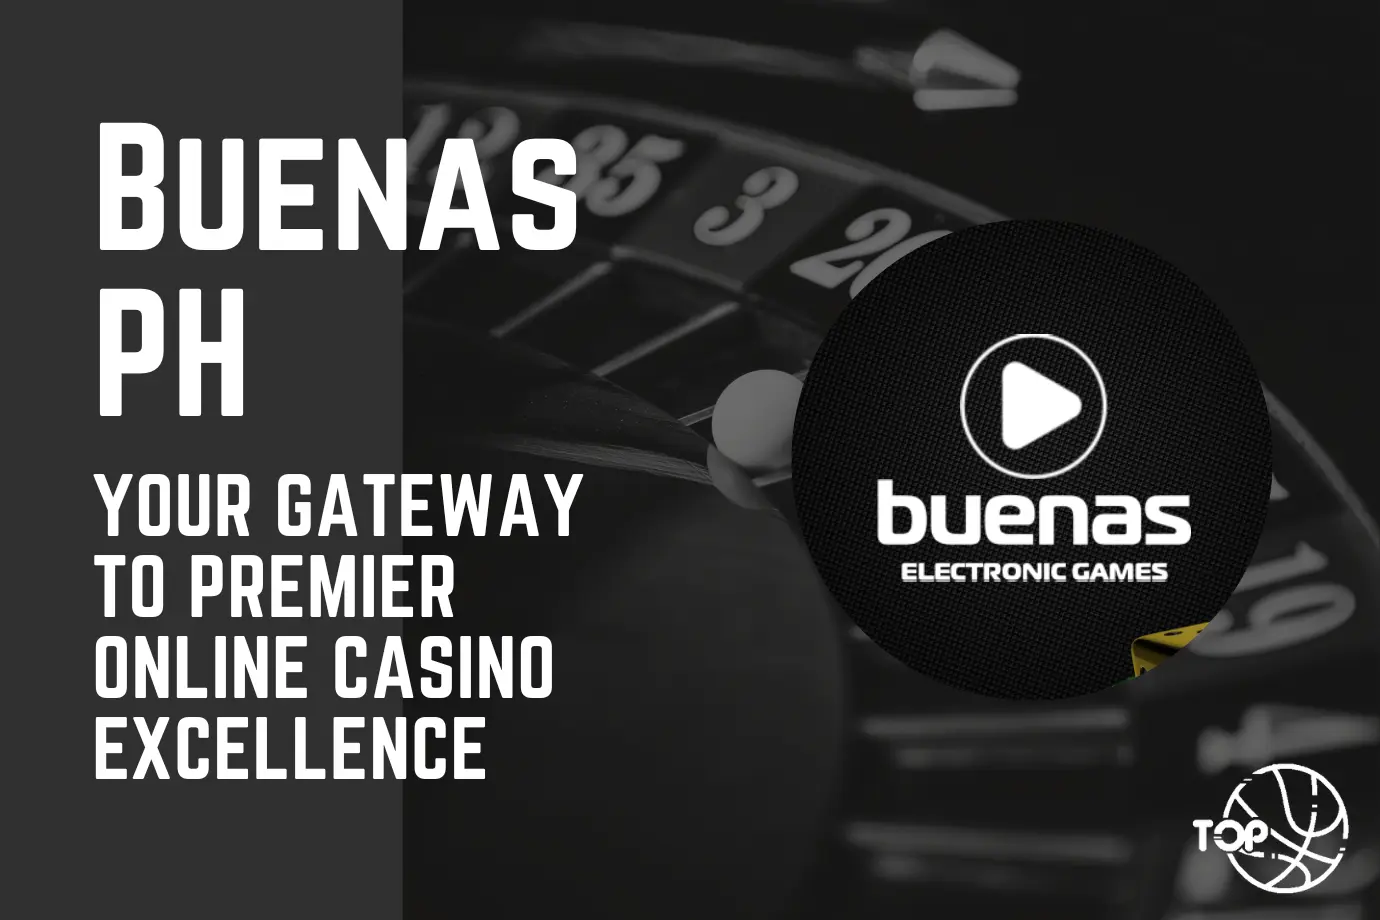 Buenas PH: Your Gateway to Premier Online Casino Excellence